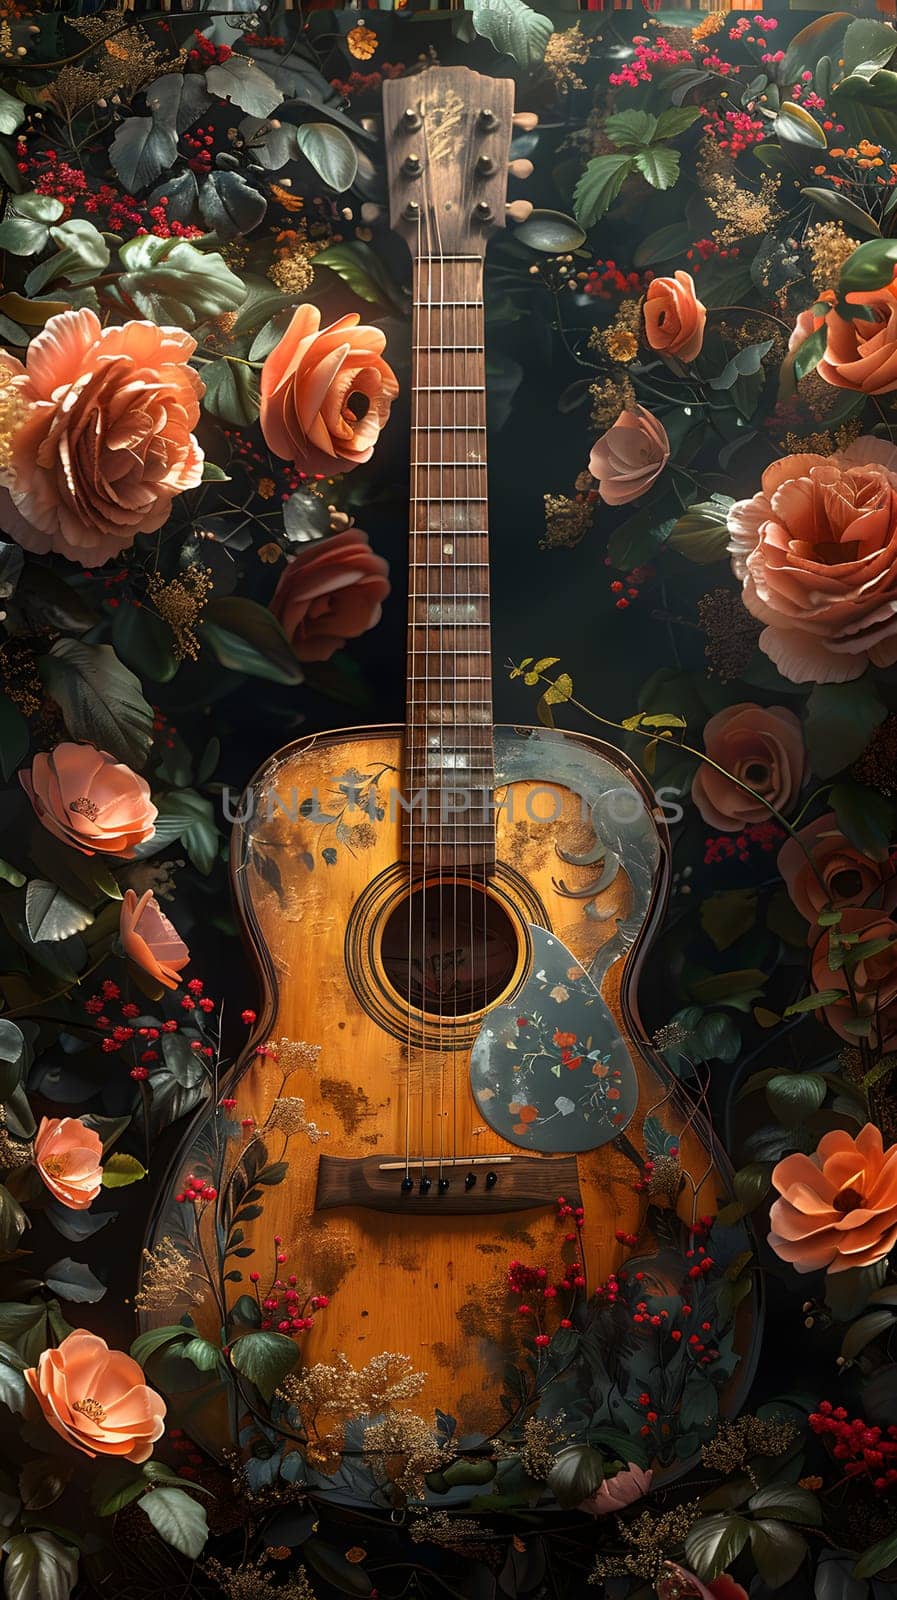 A beautiful acoustic guitar is nestled amidst a bed of vibrant roses in a serene garden setting